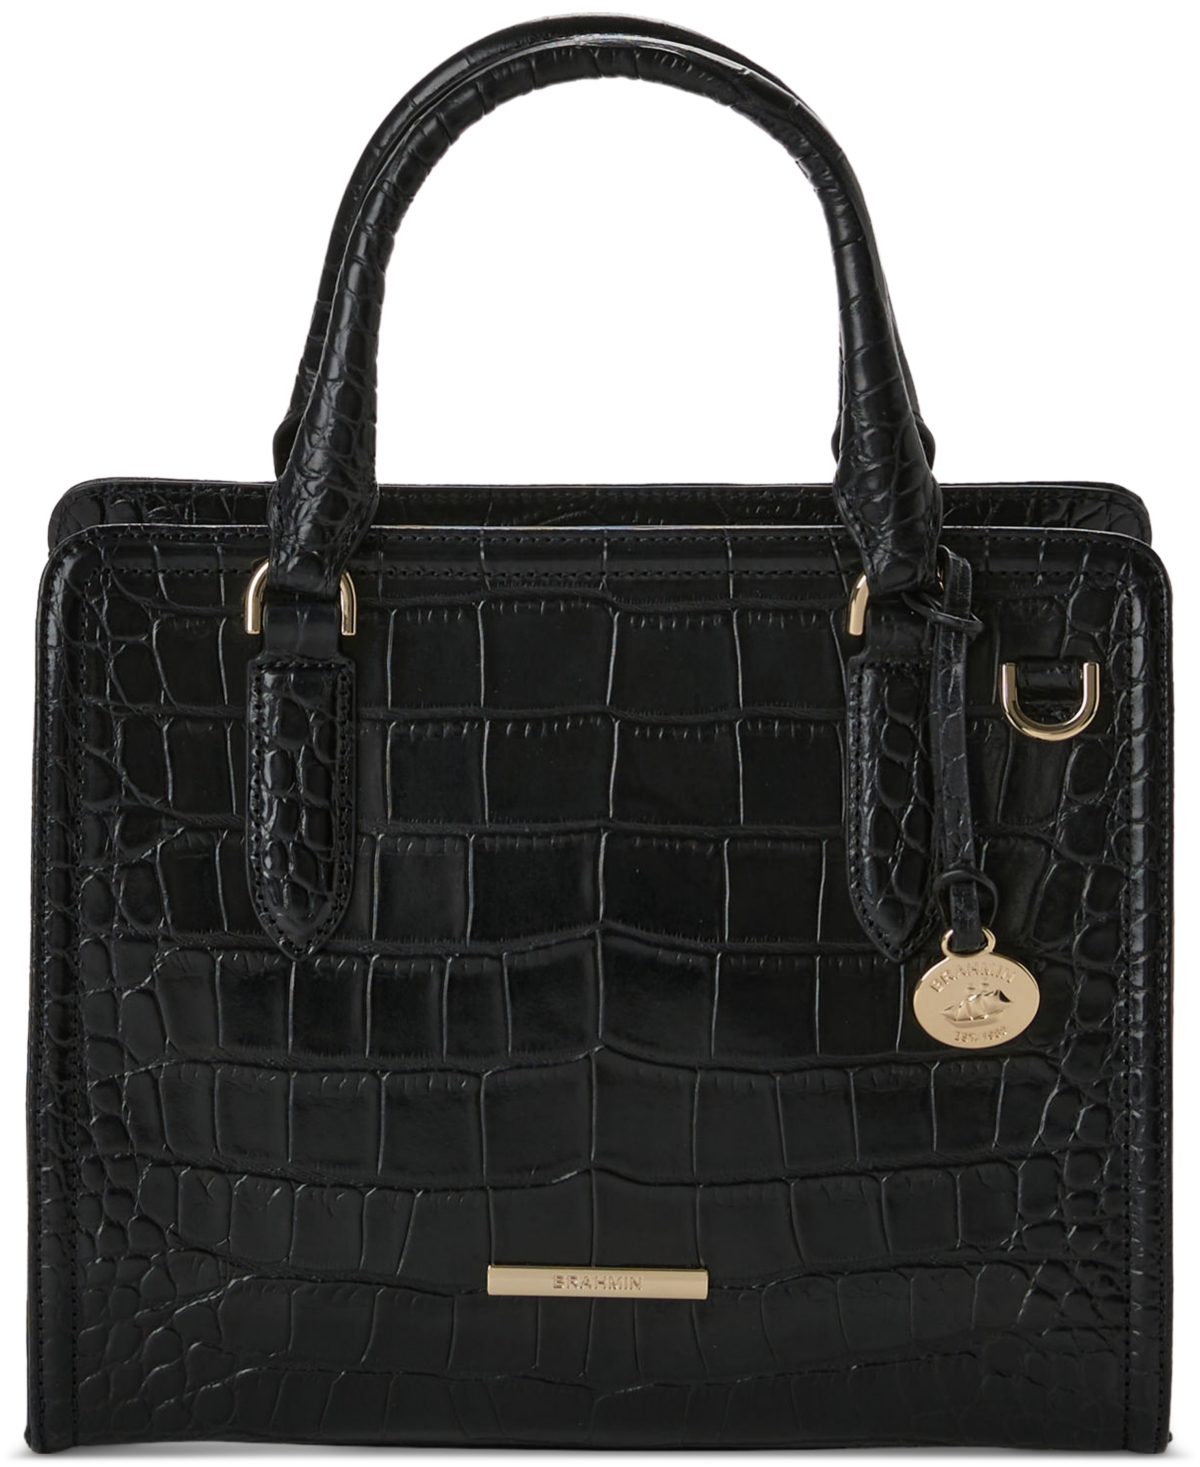 Brahmin Cami Small Leather Satchel In Black